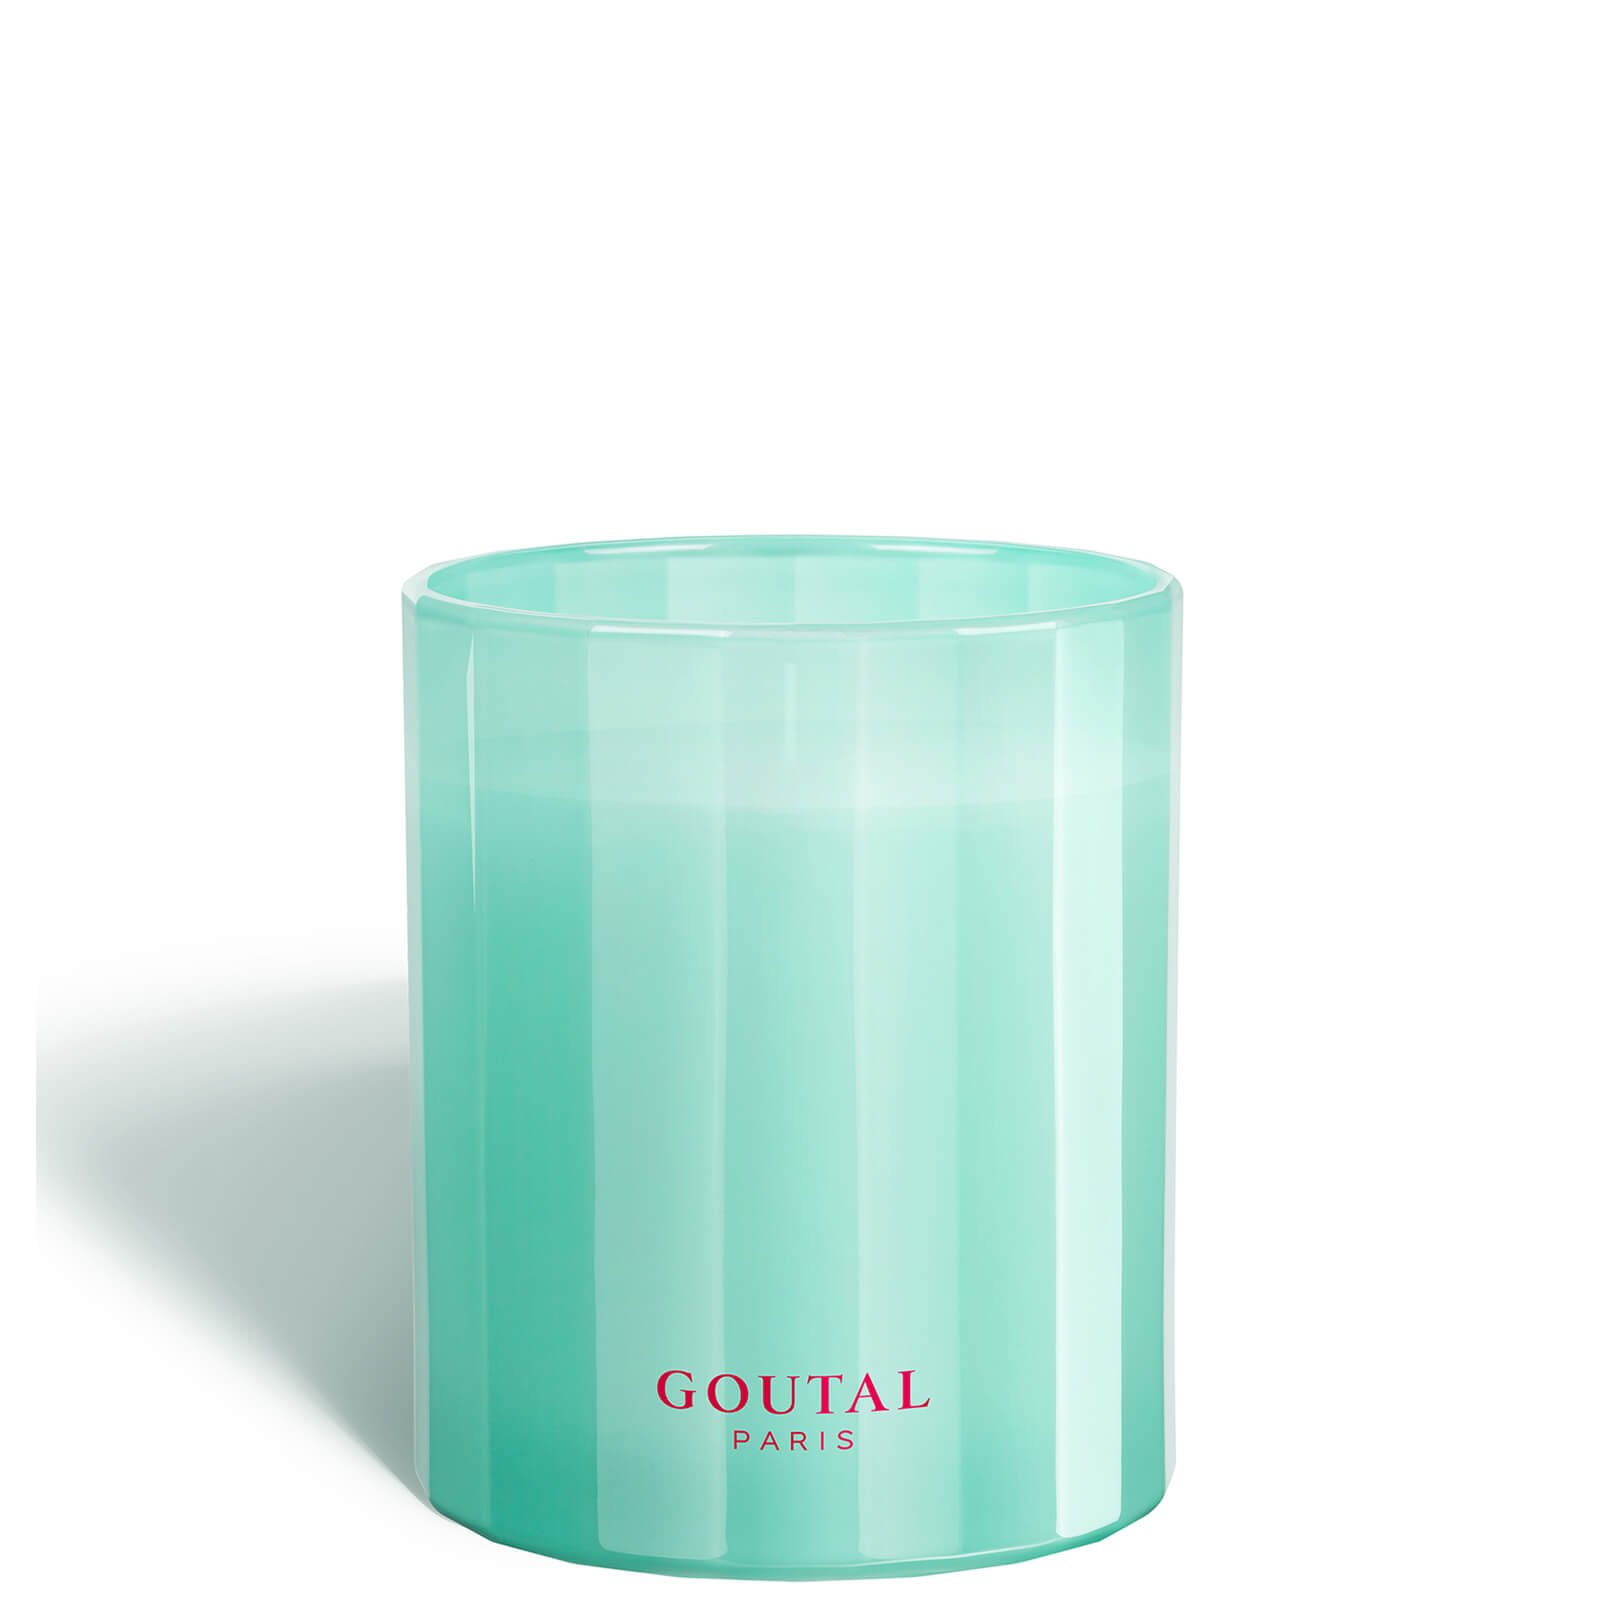 Goutal Limited Edition Petite Cherie Candle 185g